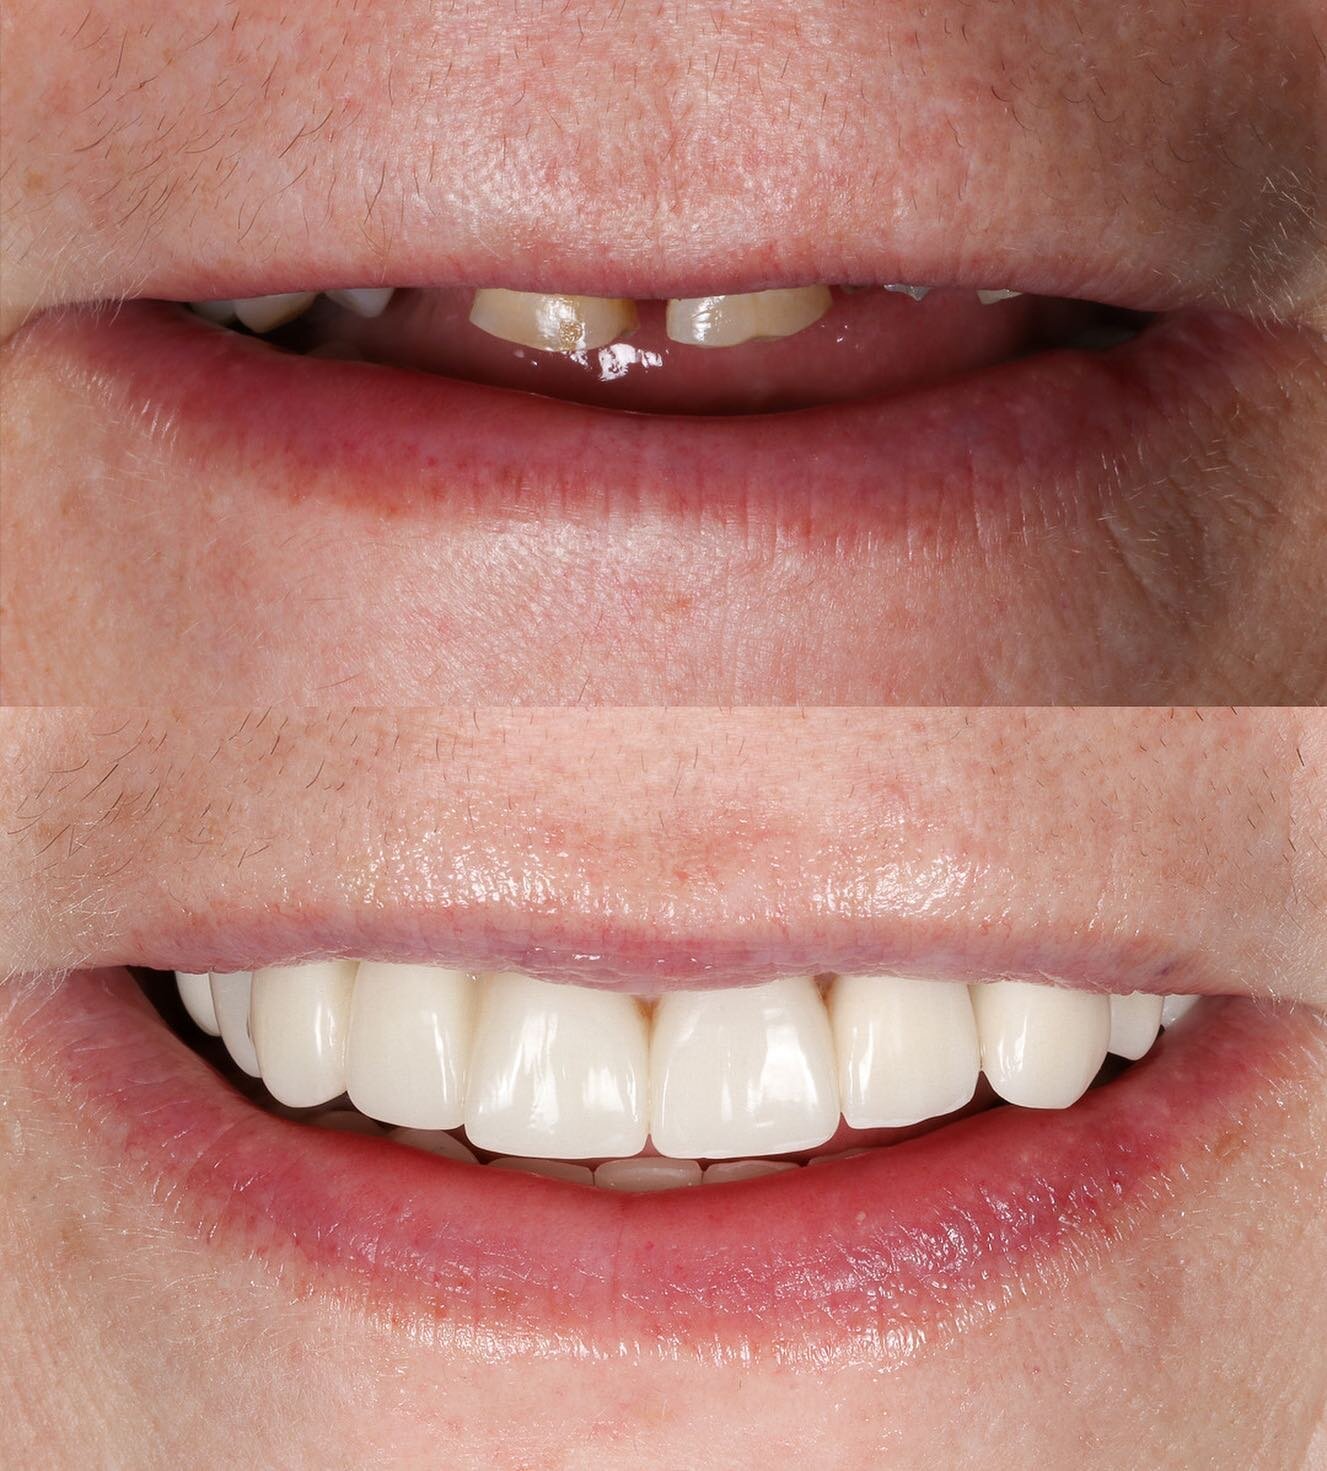 Full mouth rehab to restore this patients smile and confidence. 

Crown lengthening performed in the anterior, VDO was increased, edentelous posterior areas were restored with RPDs. Anterior missing teeth made it harder to get ideal contours / length